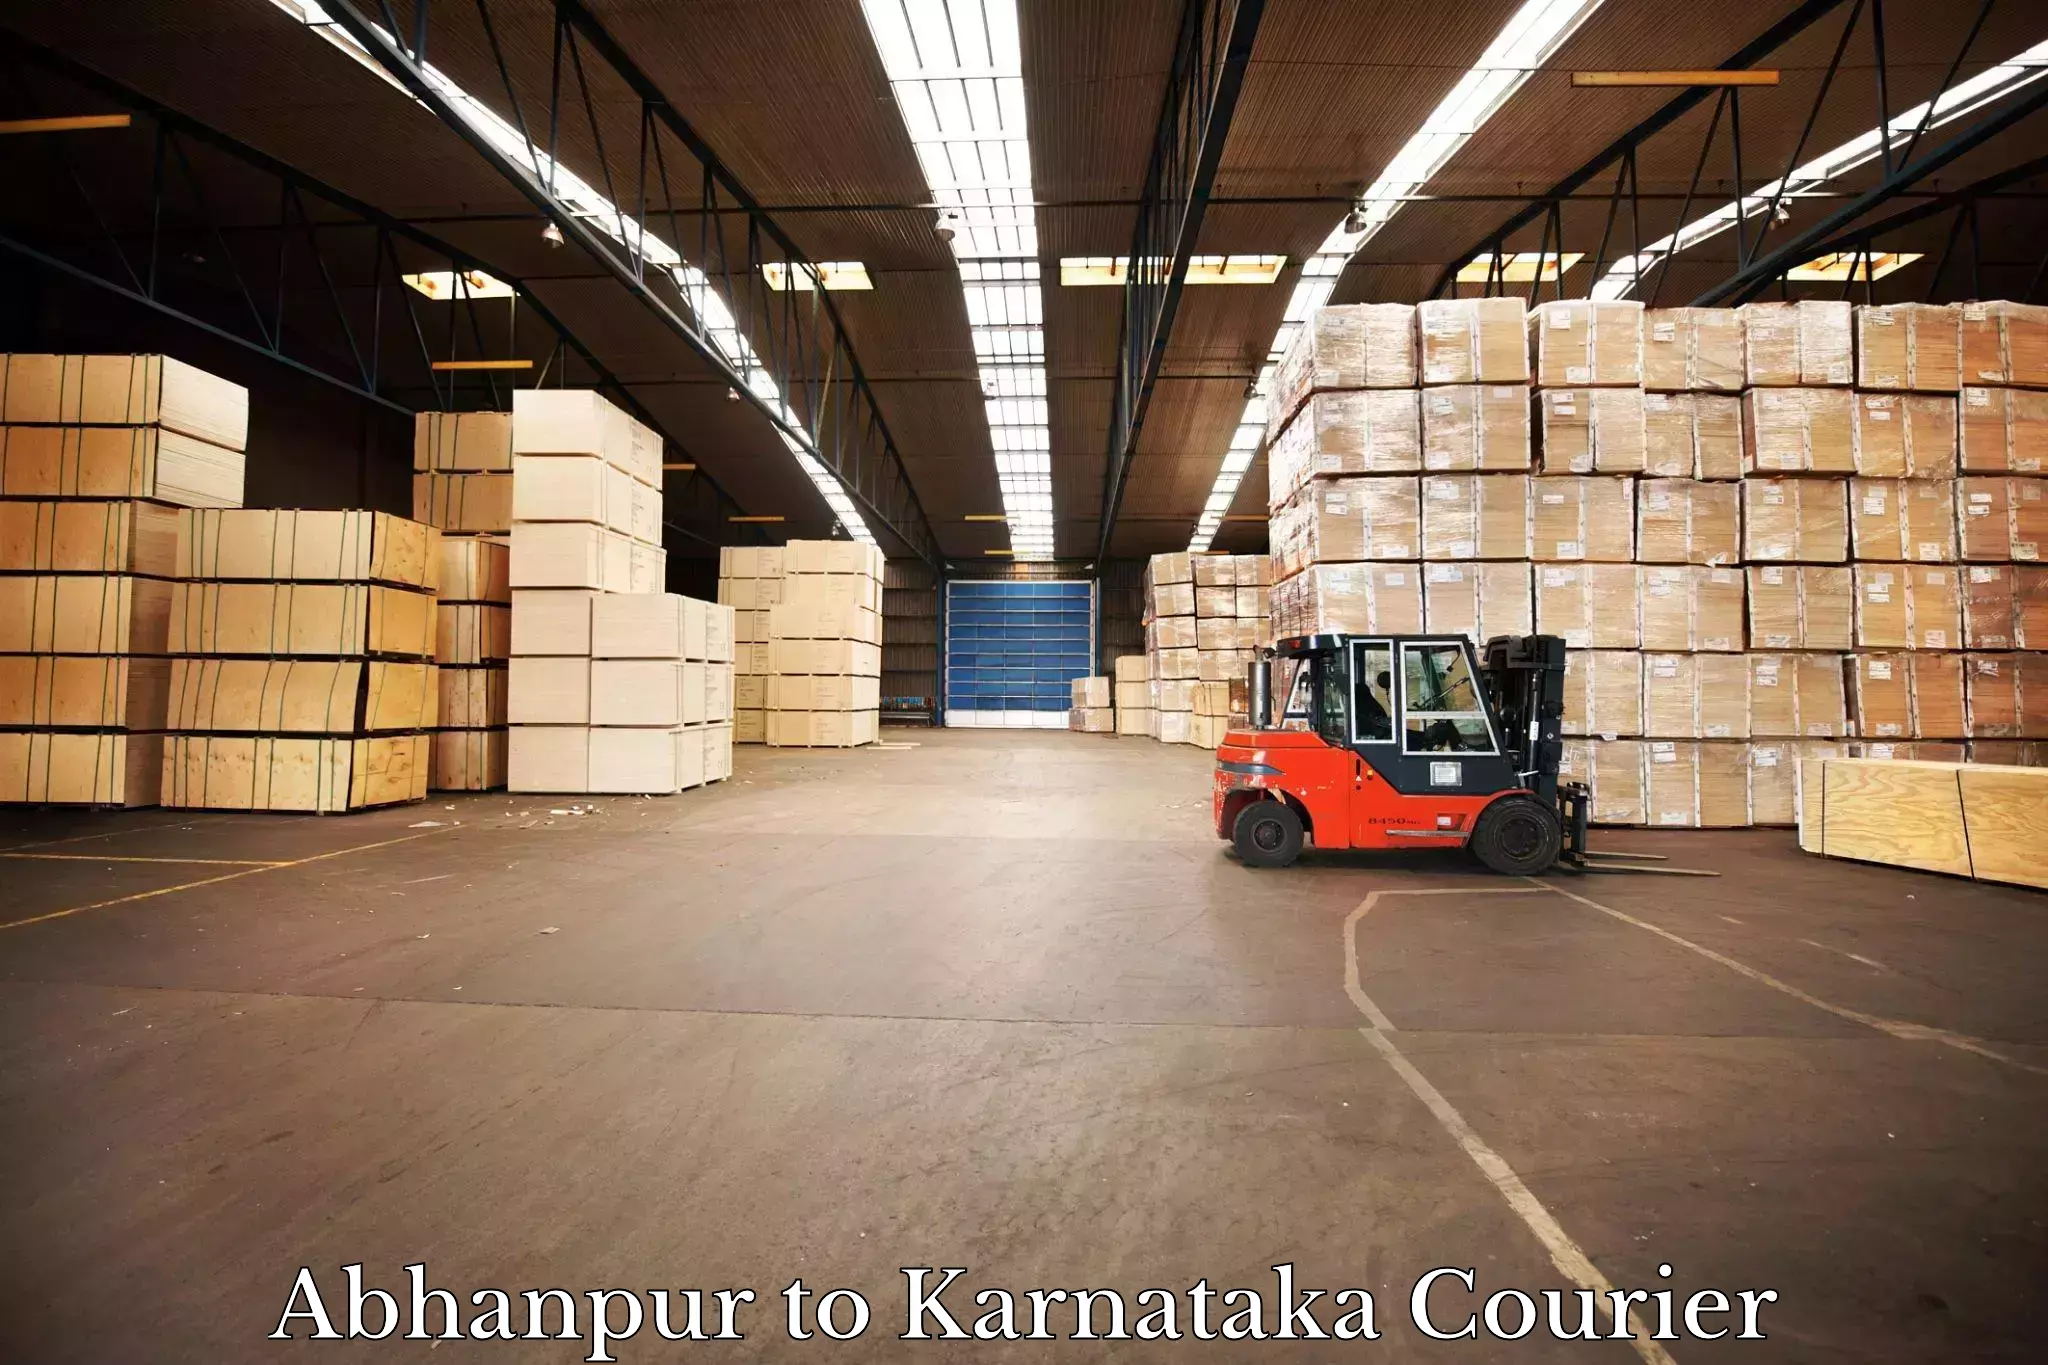 Package delivery network Abhanpur to Karnataka